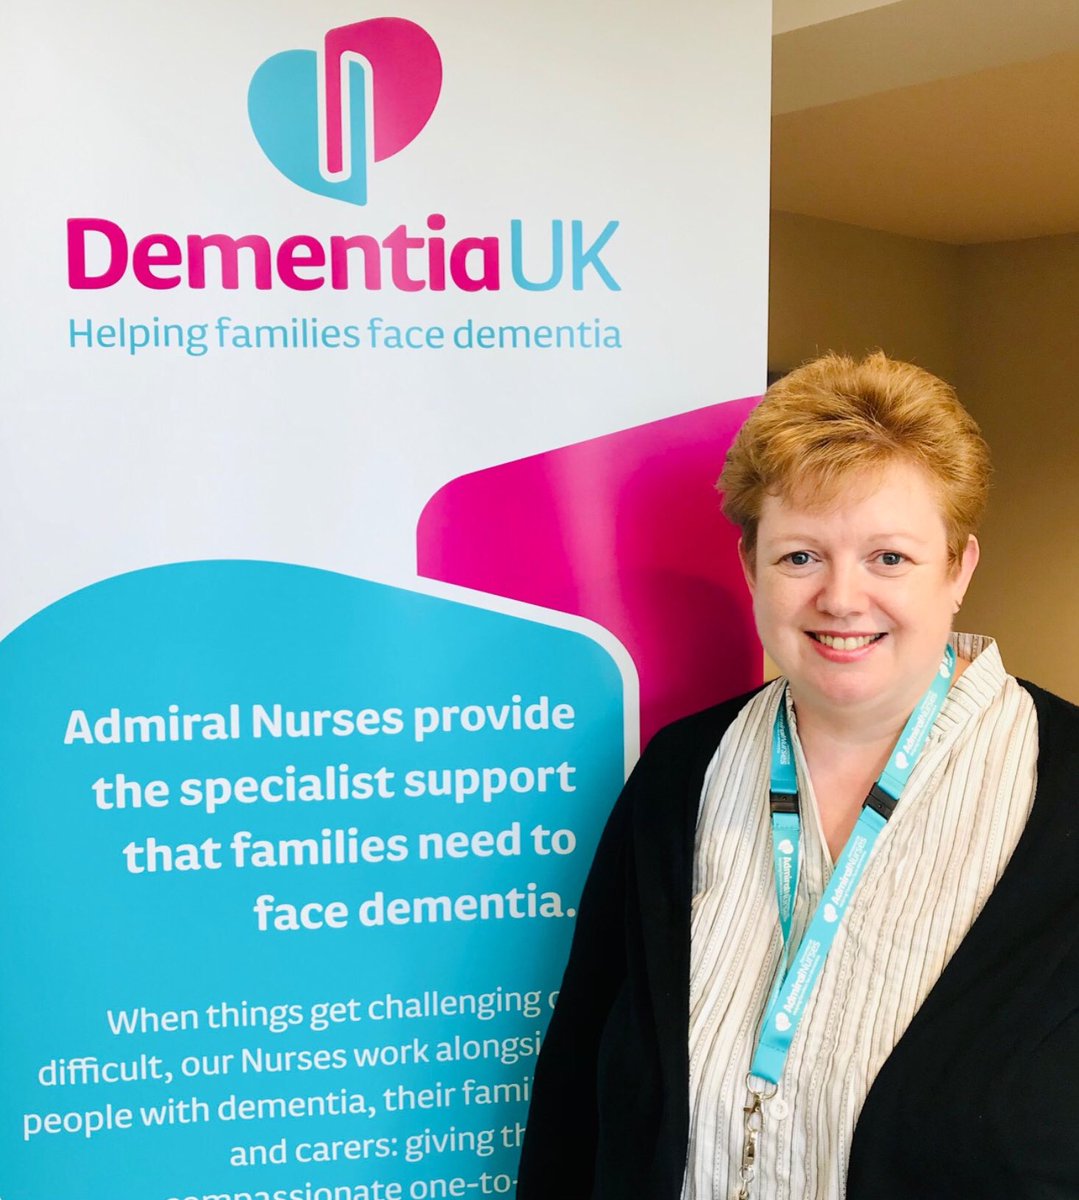 Started 1 year ago today on this amazing journey of being an #AdmiralNurse @StKentigernHospice @DementiaUK. I feel so privileged to be able to support #carers & people living with dementia in the hospice and their own homes.